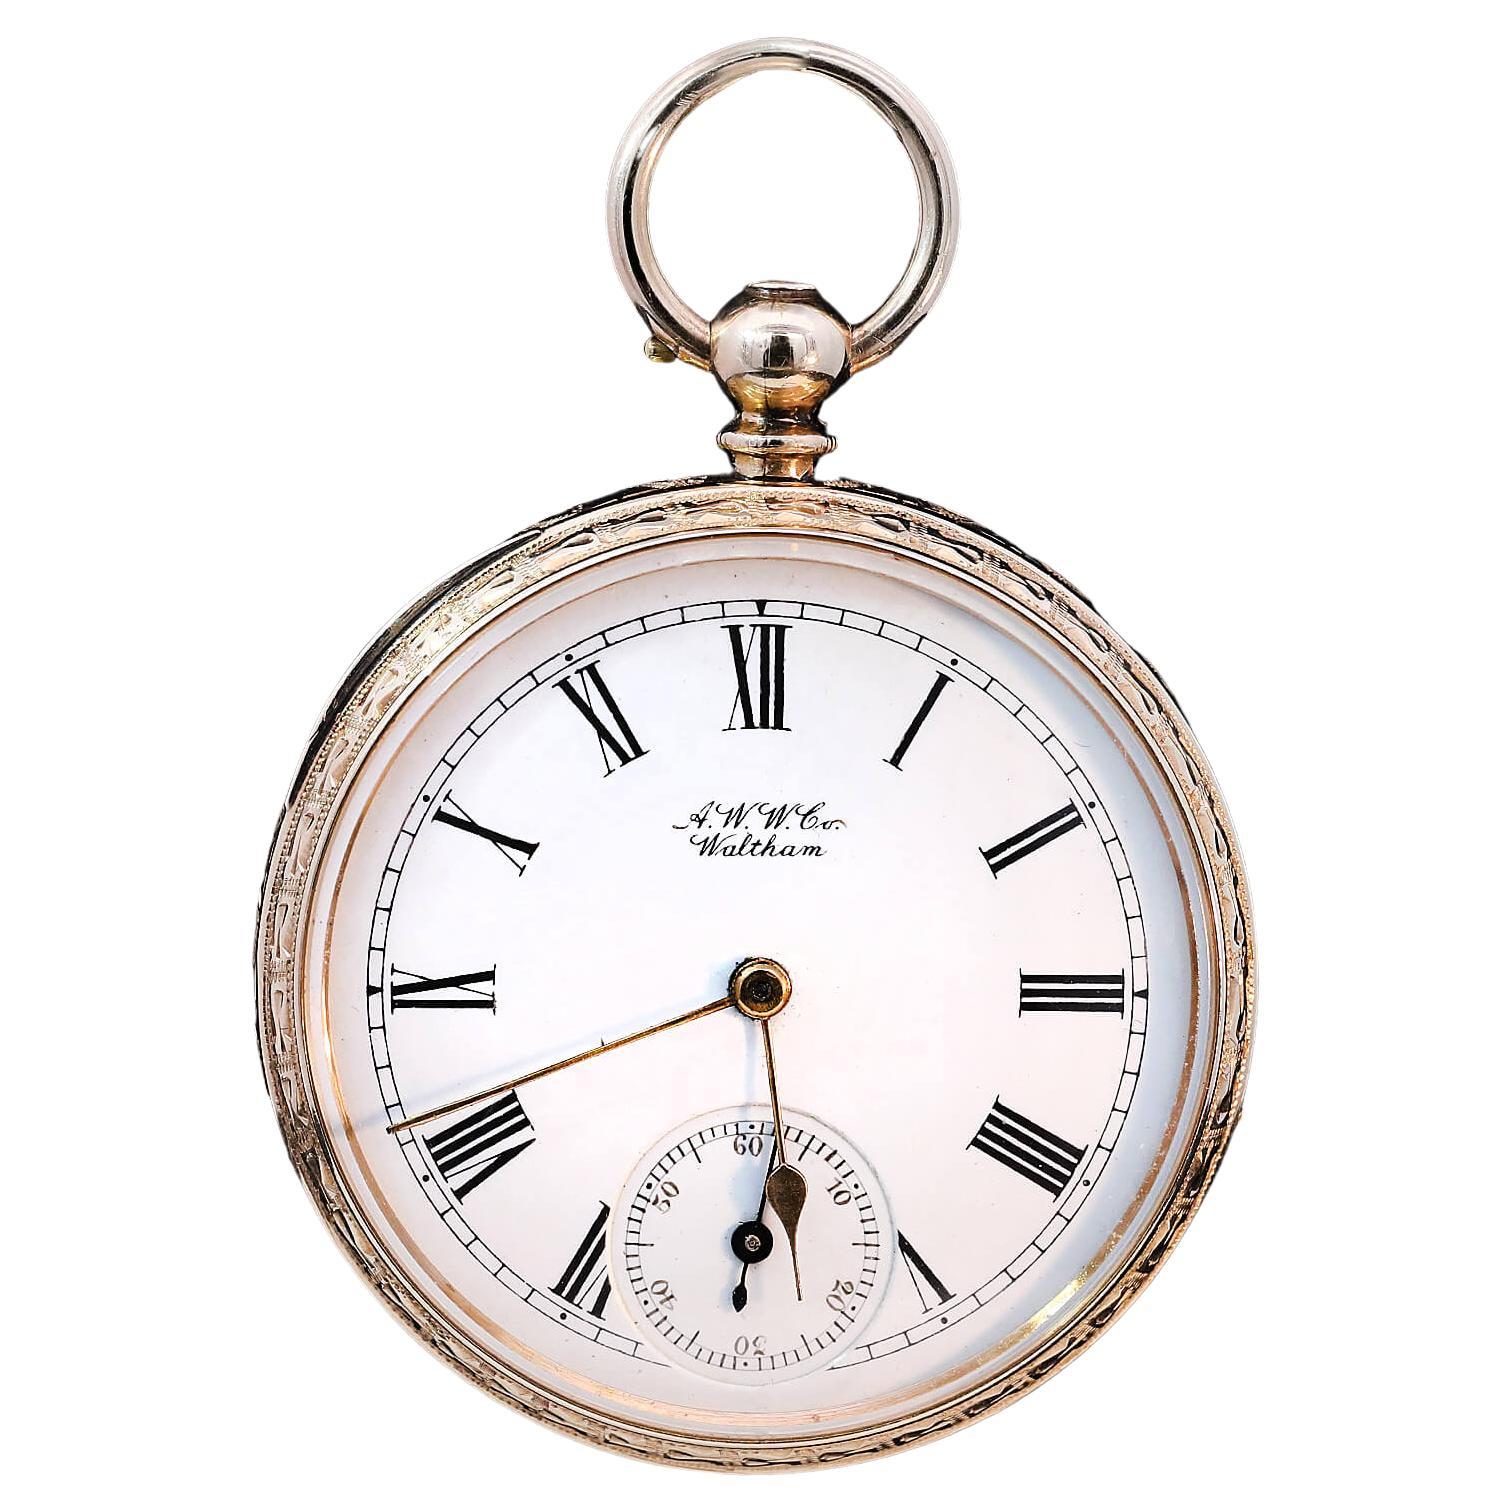 Waltham Open Faced Pocket Watch Circa 1886 For Sale